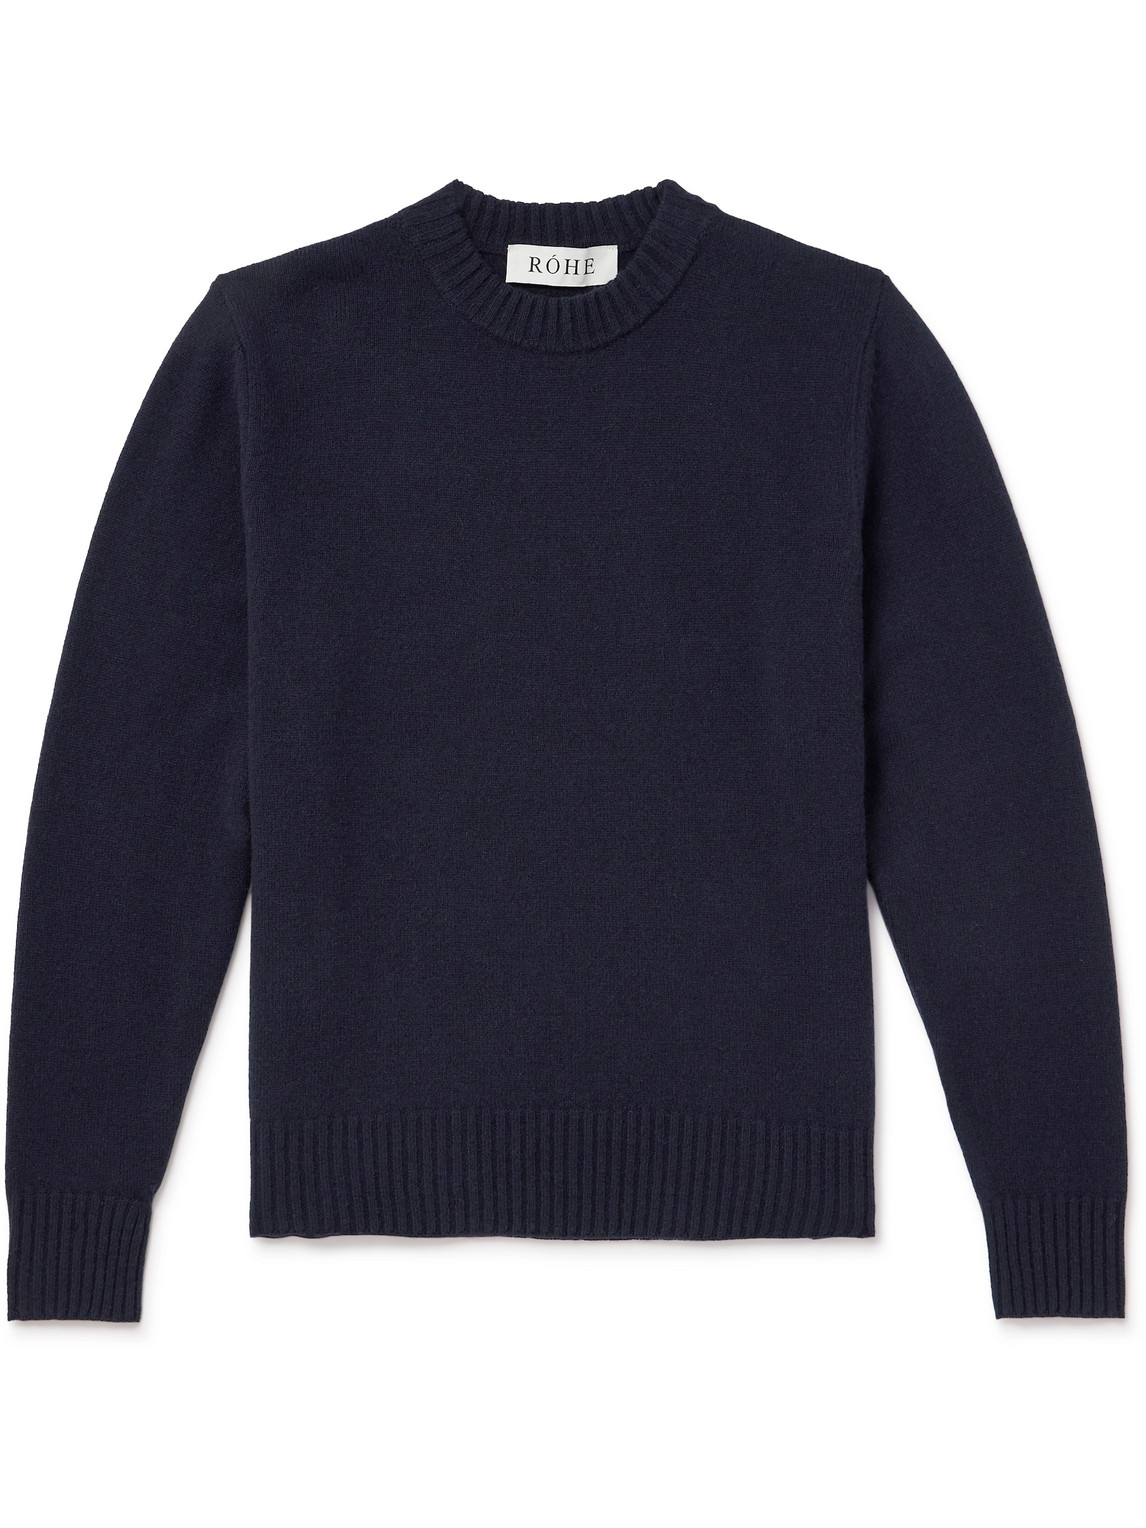 Rohe Wool And Cashmere-blend Sweater In Blue